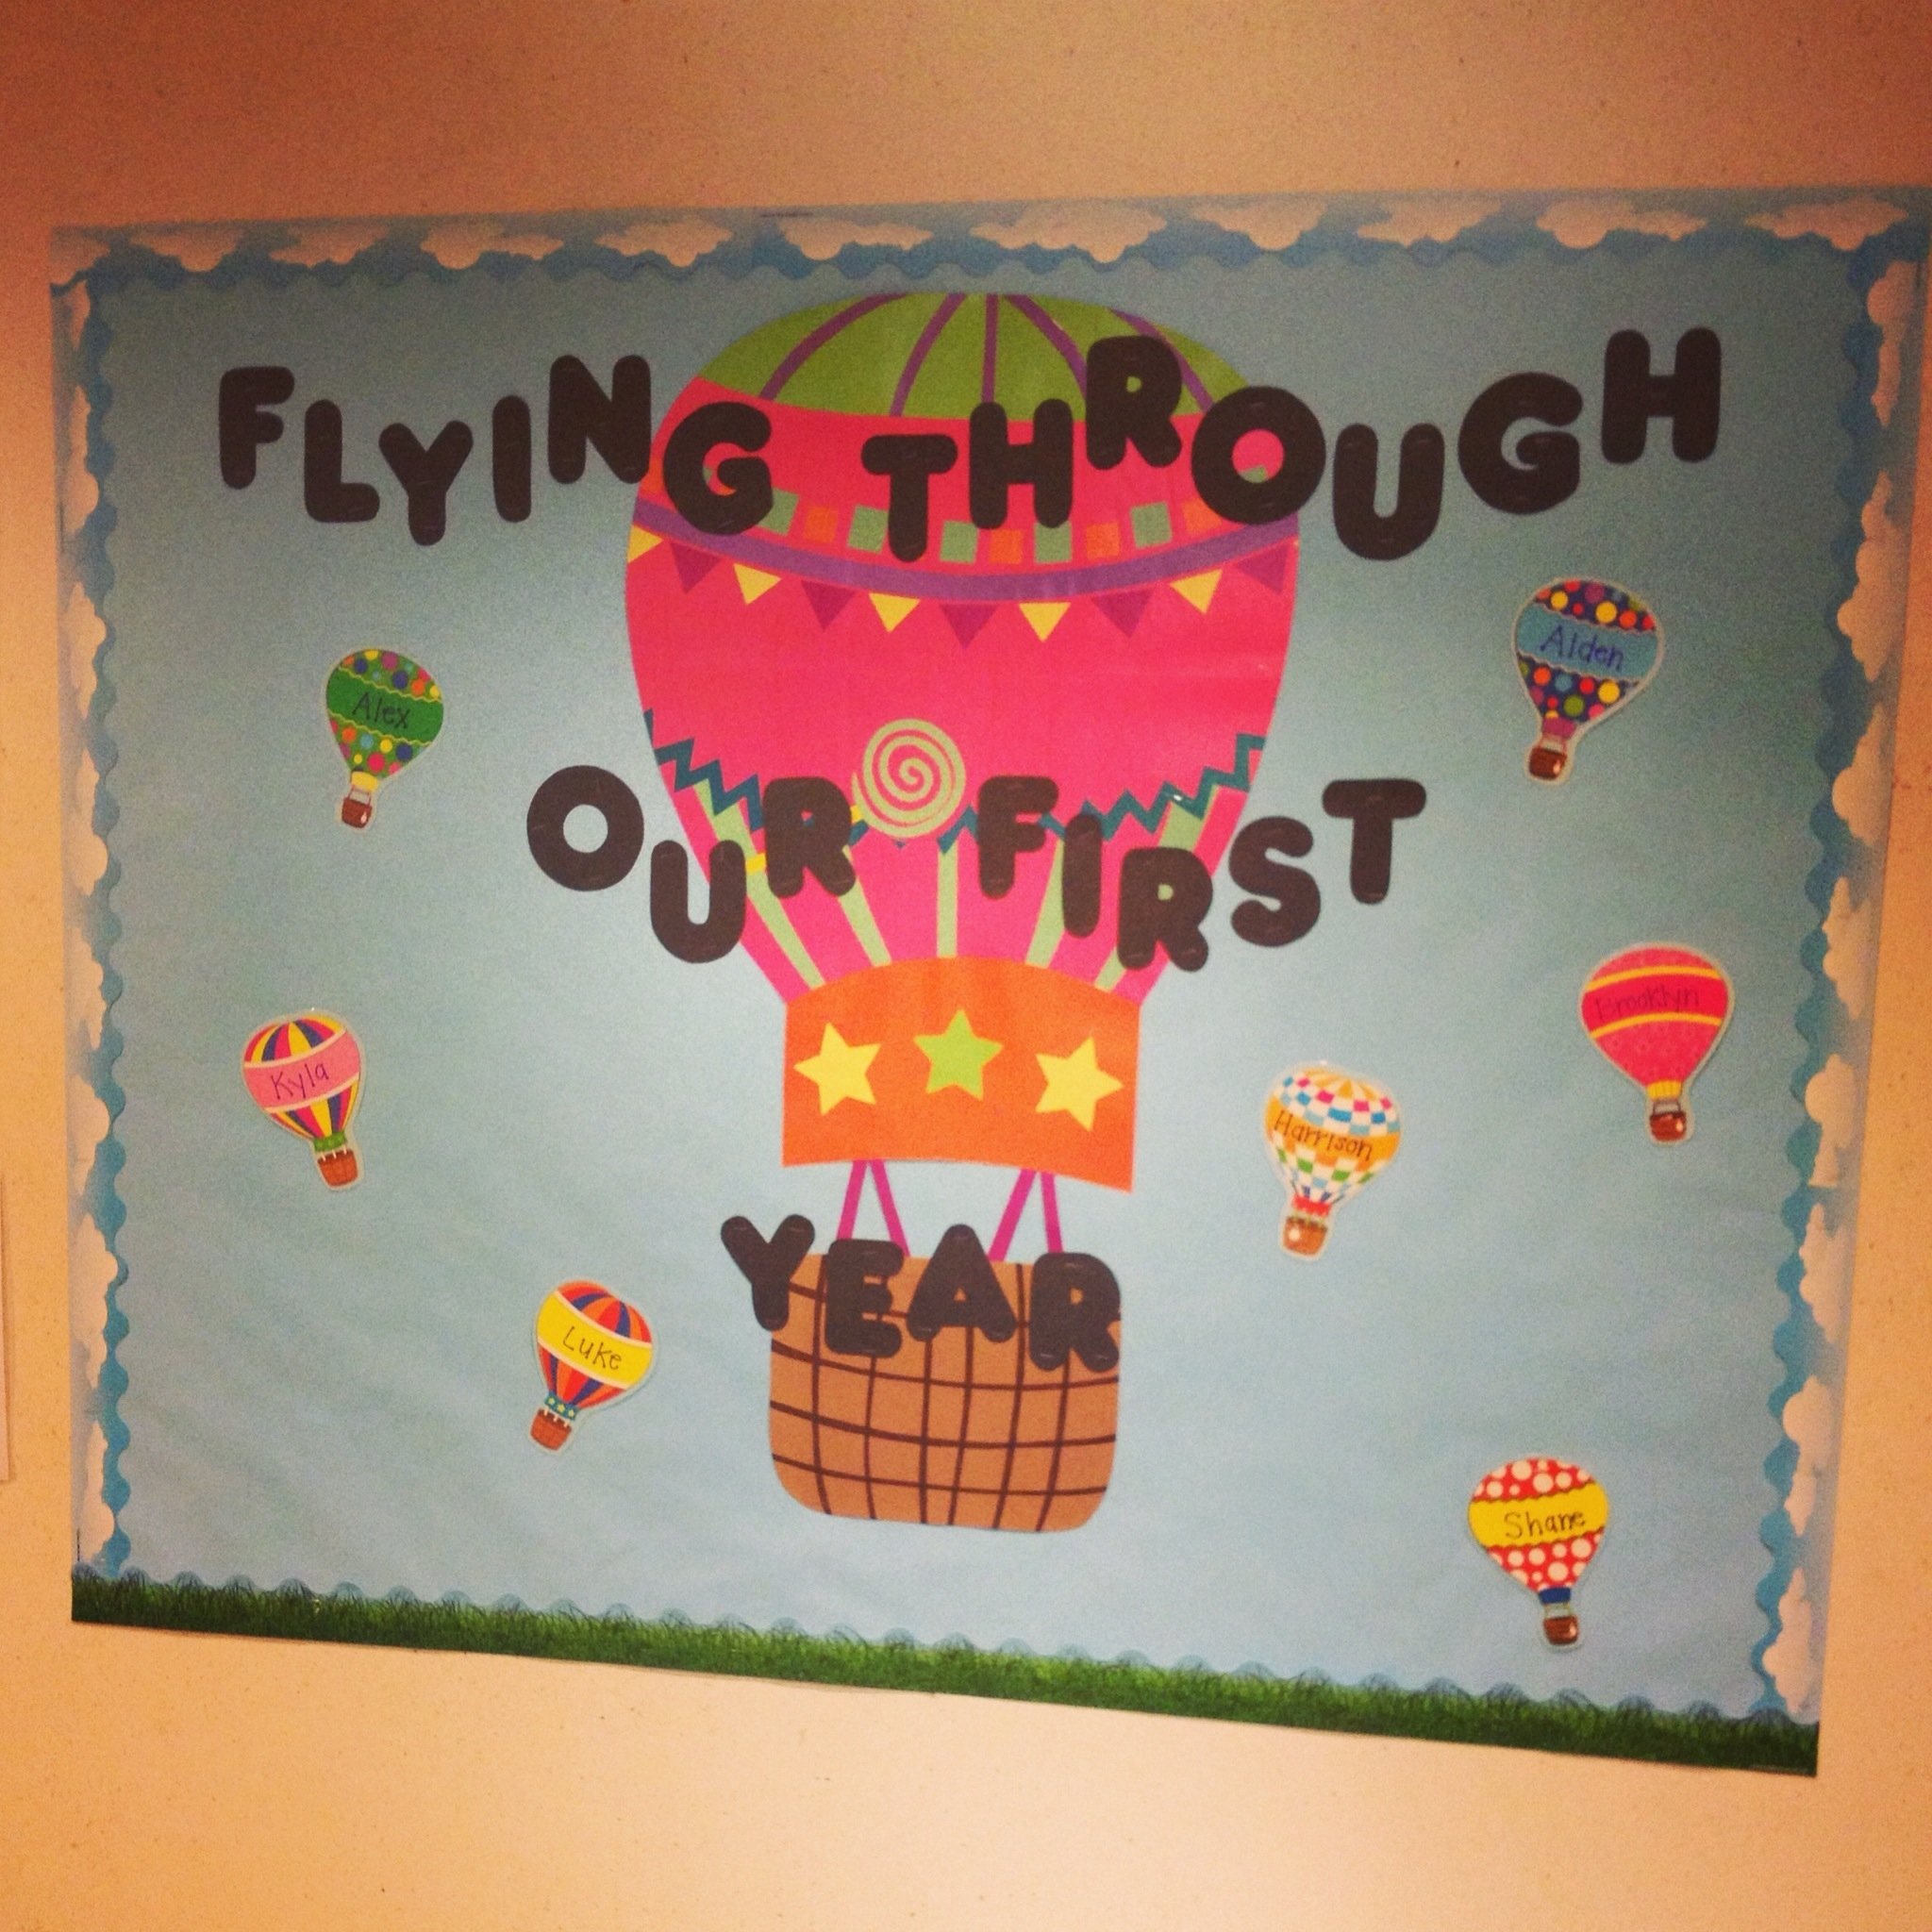 10 Fantastic Infant Room Bulletin Board Ideas good bulletin board for an infant room flying through our first 2023